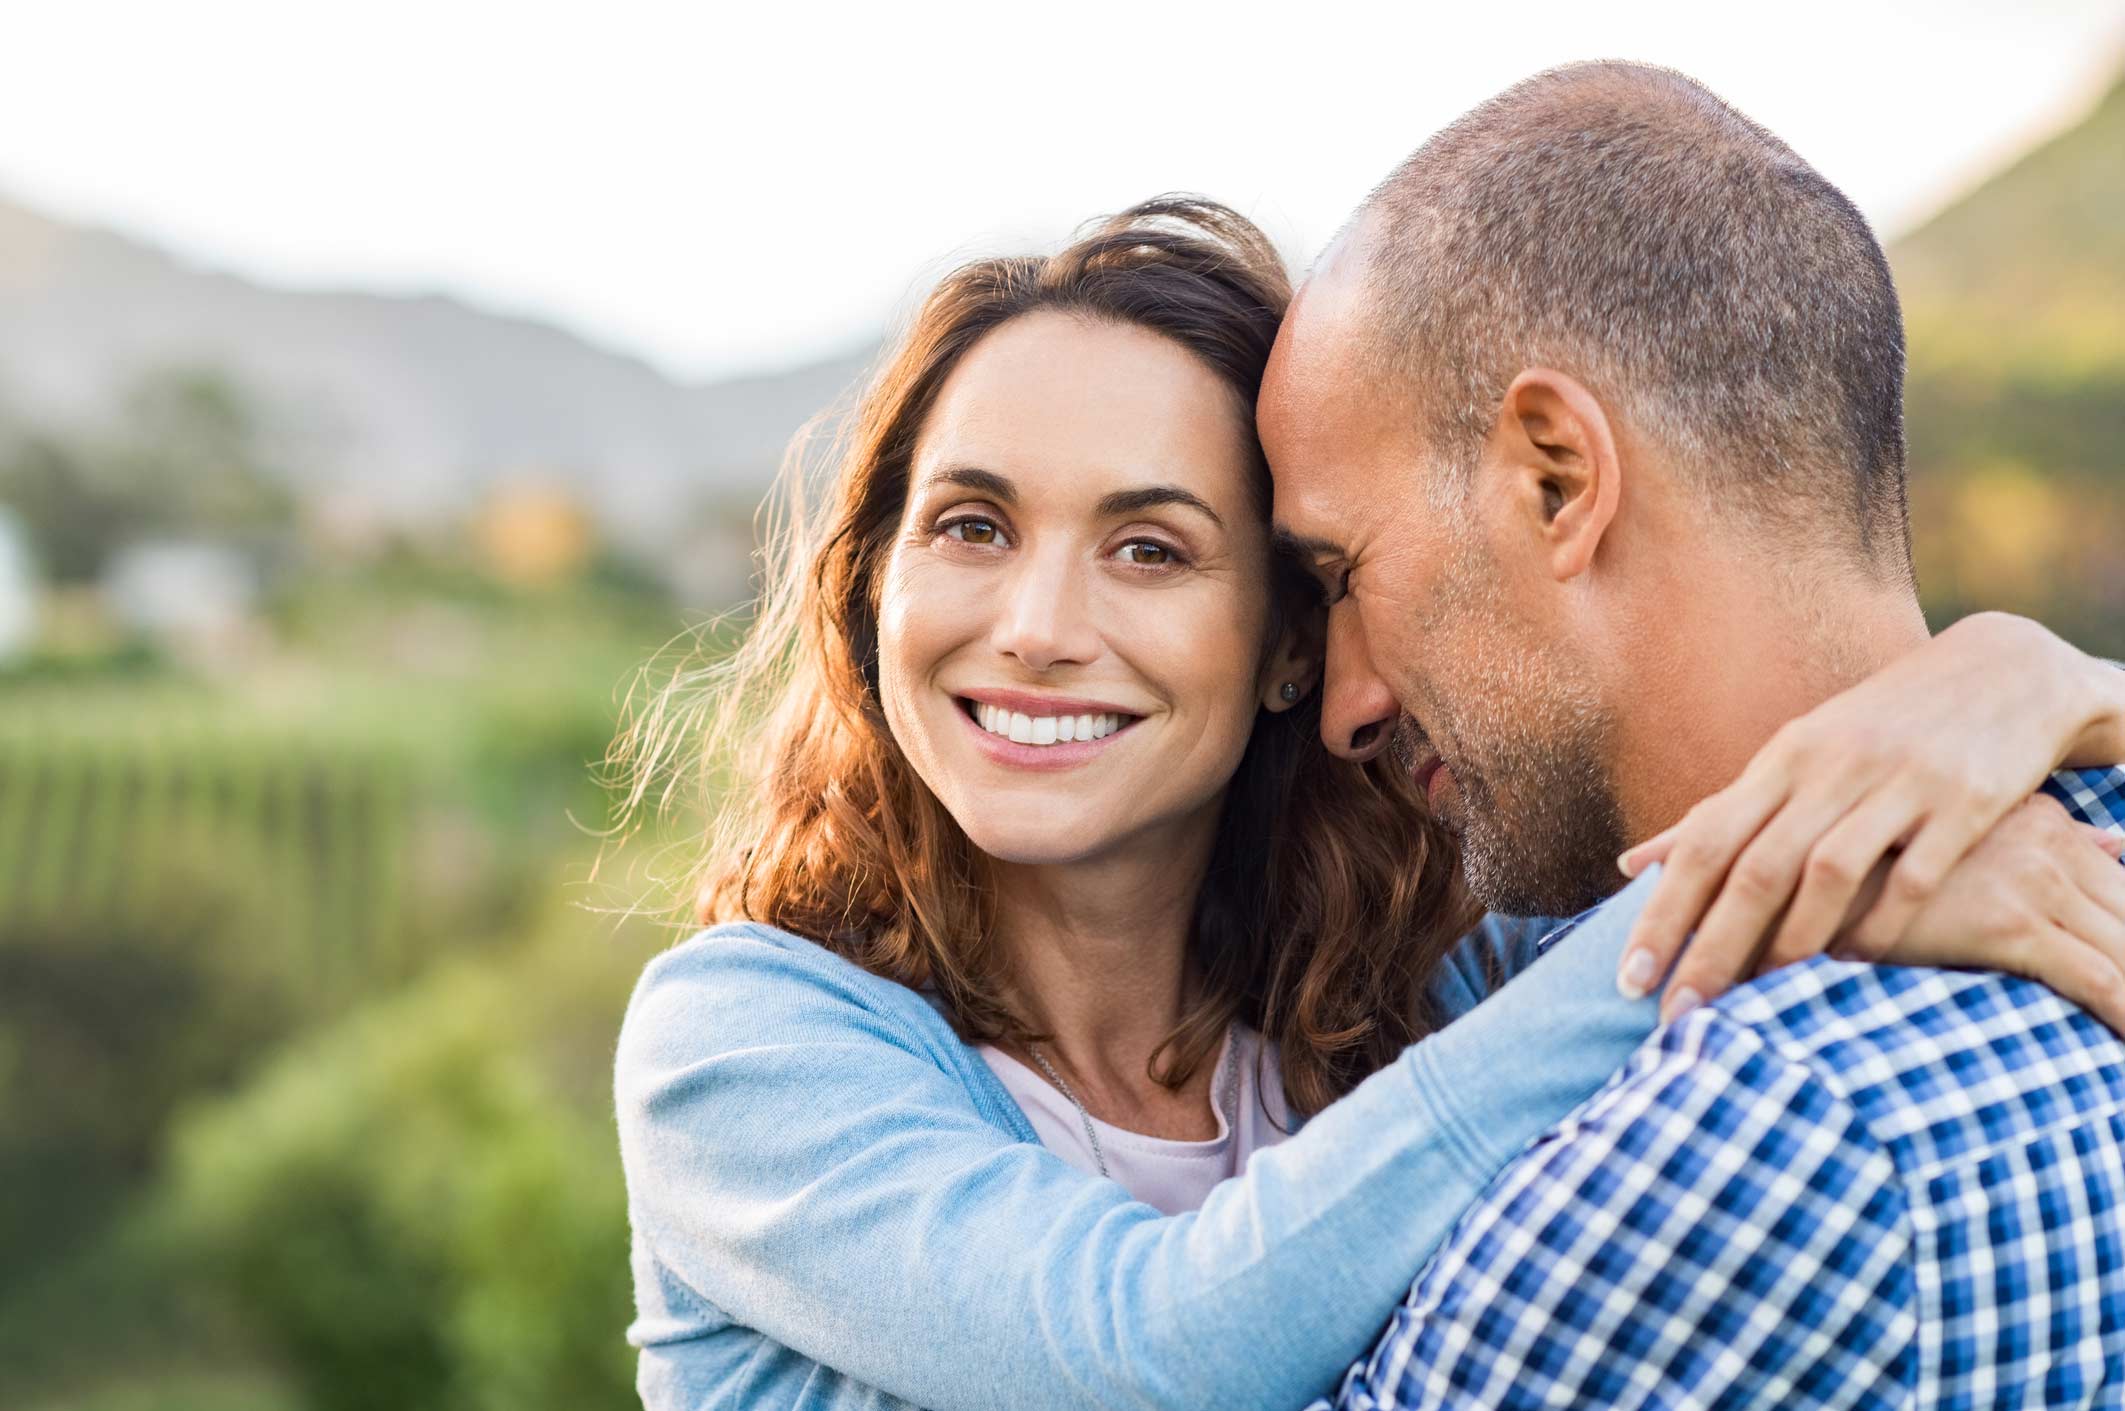 juvederm atlanta, image of a young woman smiling and embracing a man around the shoulders.